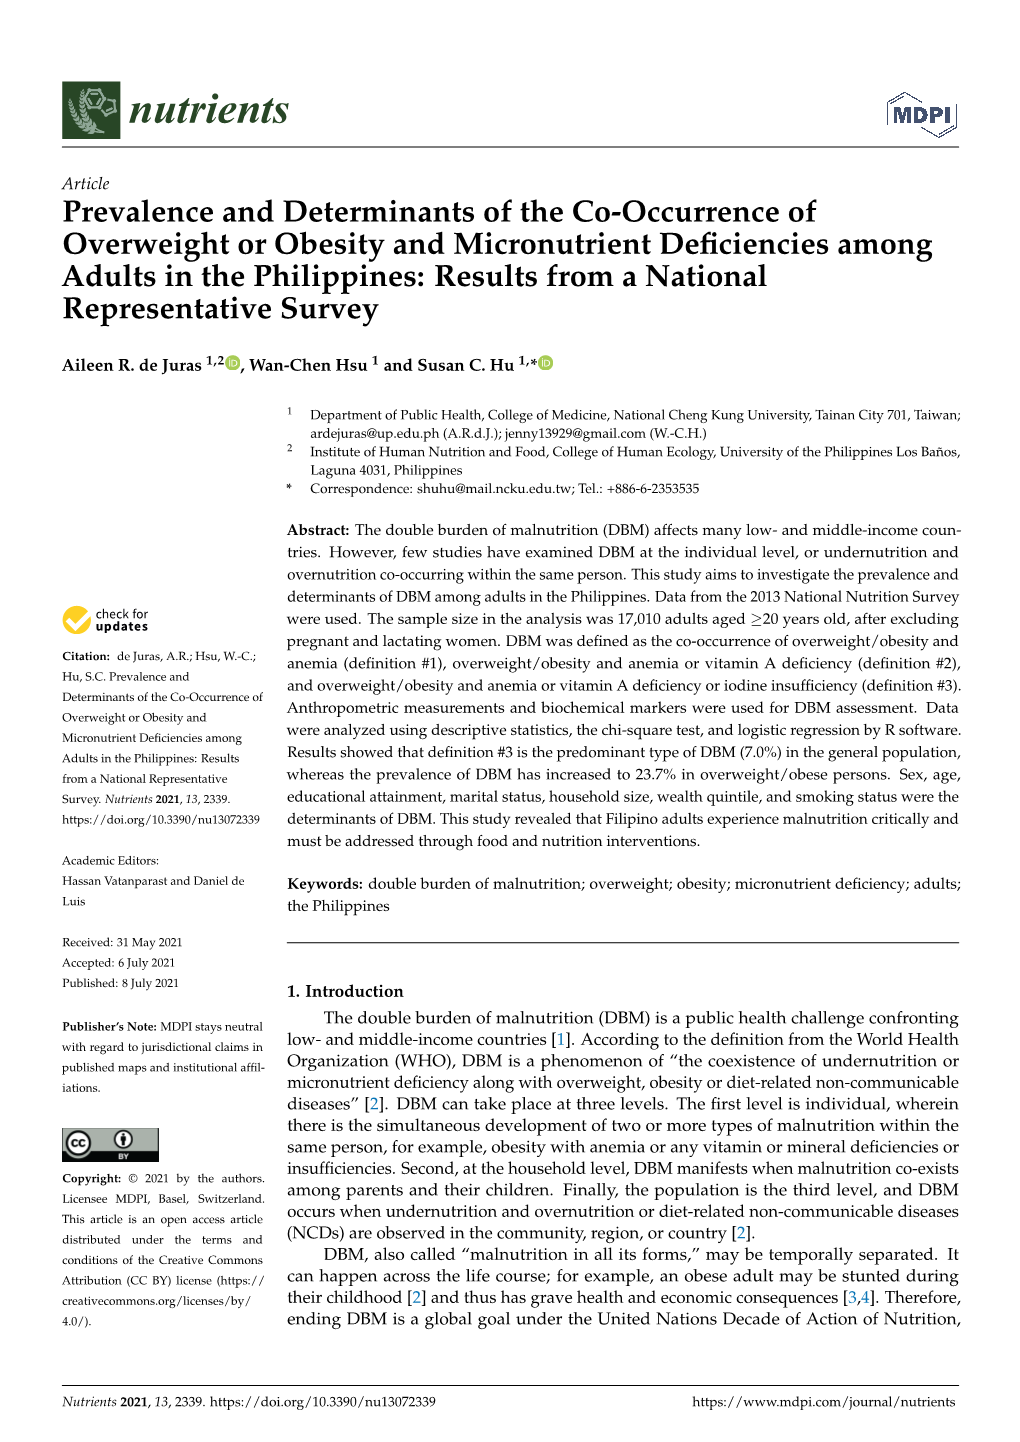 Prevalence and Determinants of the Co-Occurrence of Overweight Or Obesity and Micronutrient Deficiencies Among Adults in The